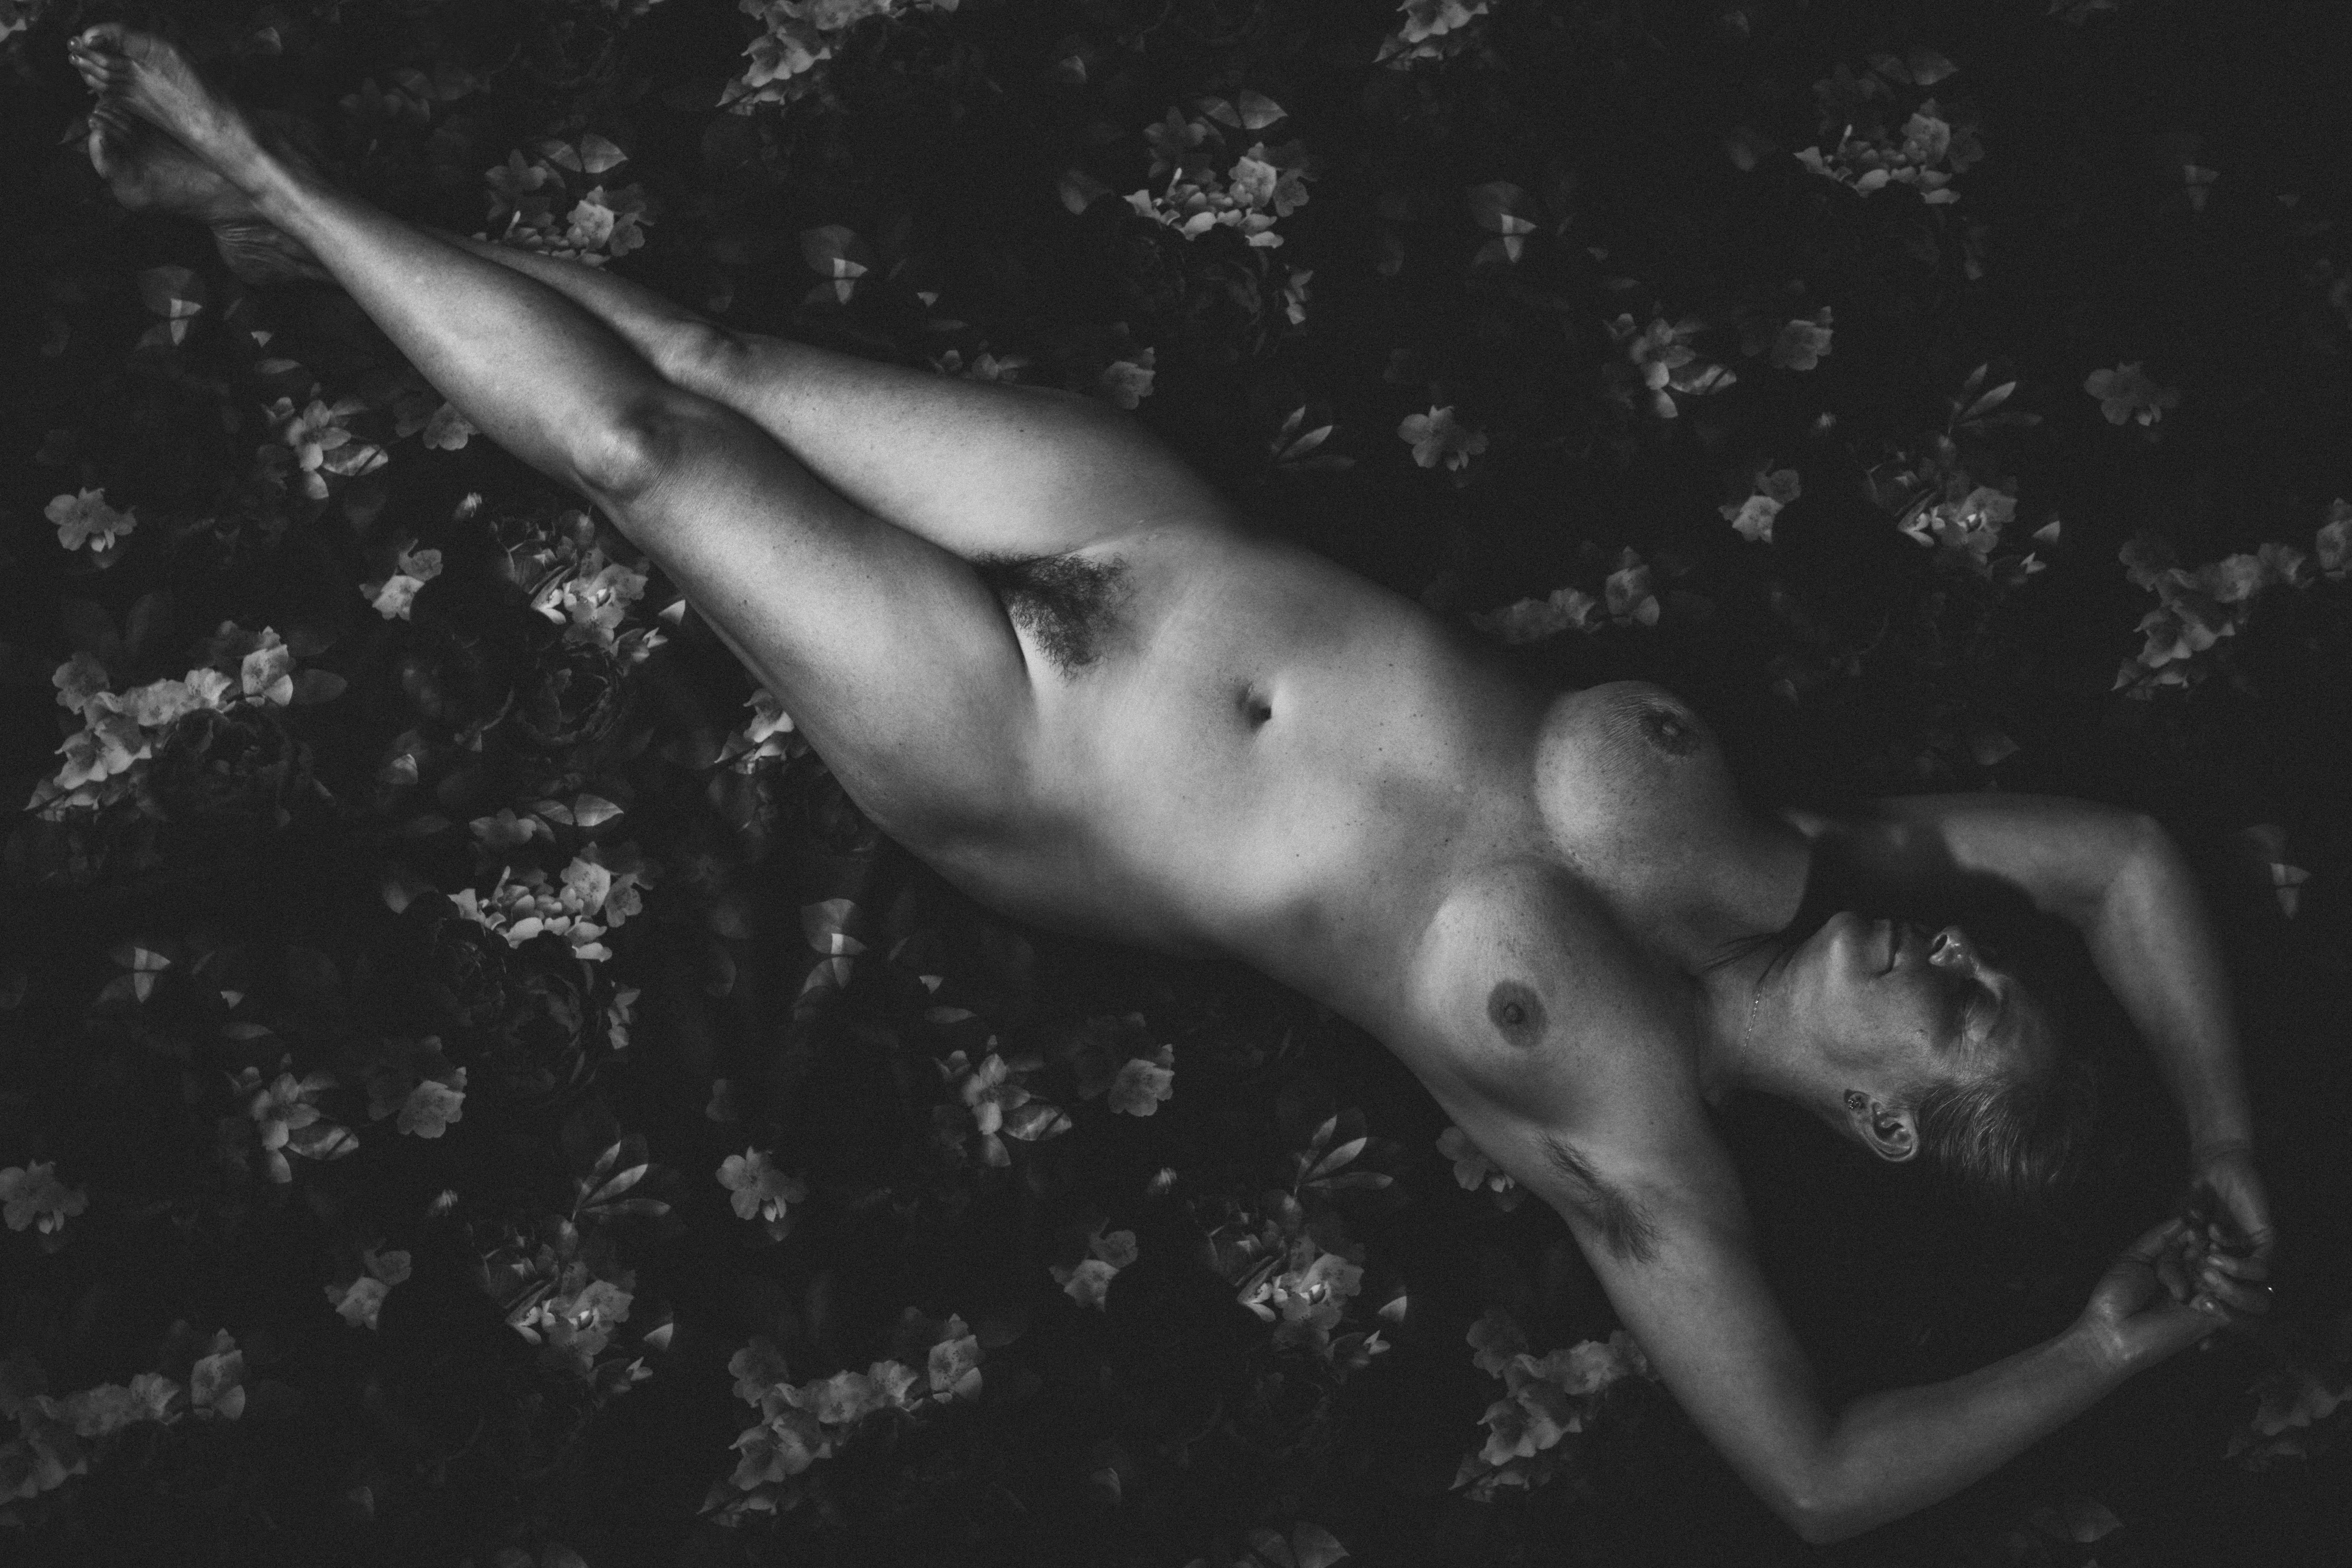 “Portrait of Nude Woman” Fine Art Nude Photography Limited Edition Print 2/3 - Black Black and White Photograph by Laurentina Miksys